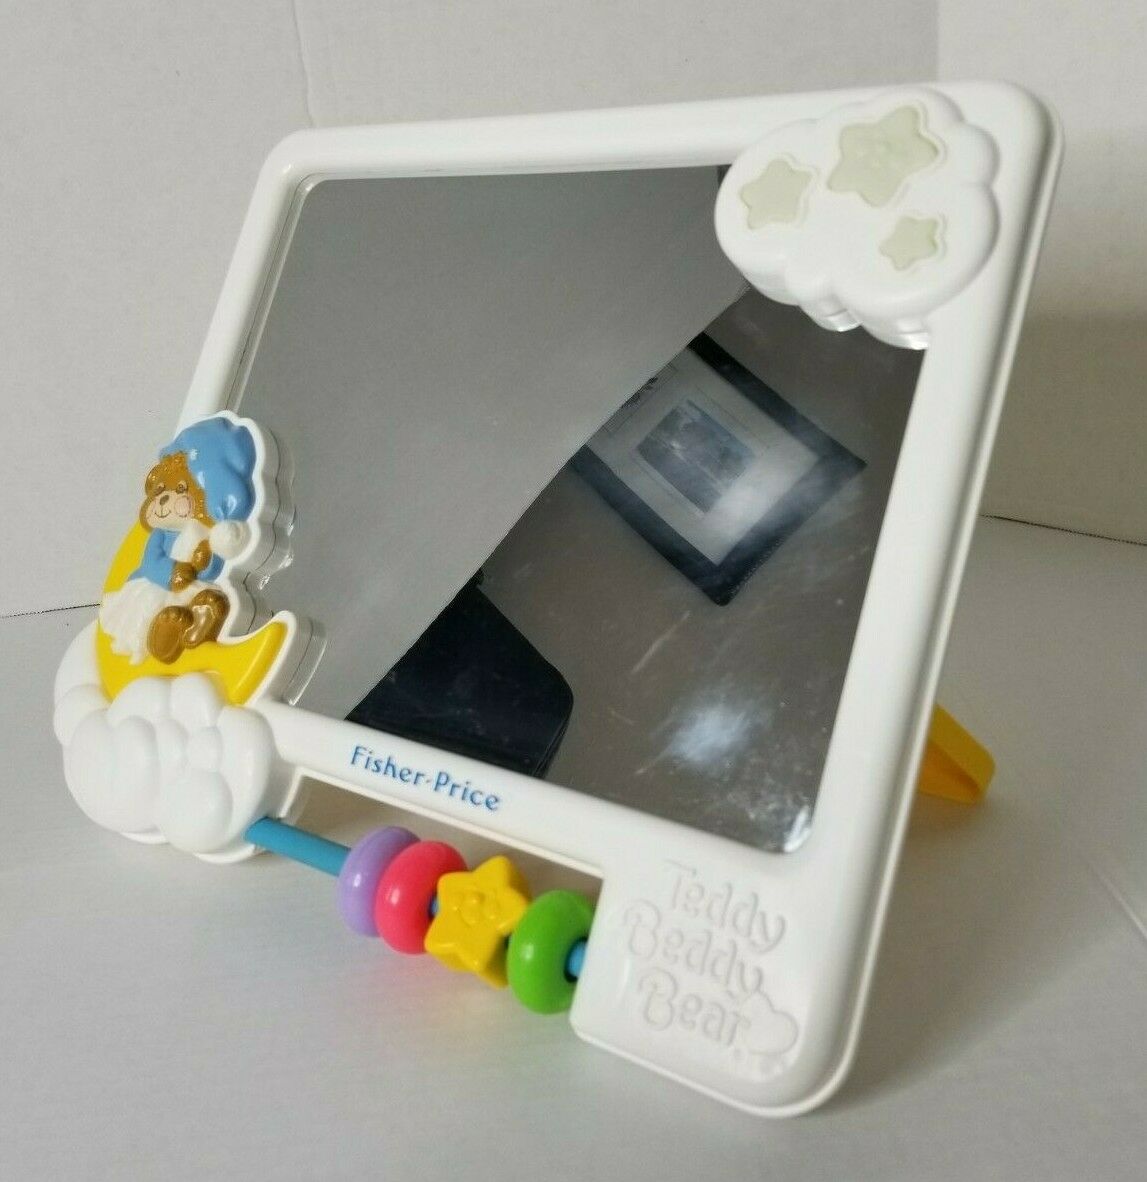 Vintage 1987 Fisher-price 1407 Teddy Beddy Bear Baby Infant Mirror Bedtime Toy